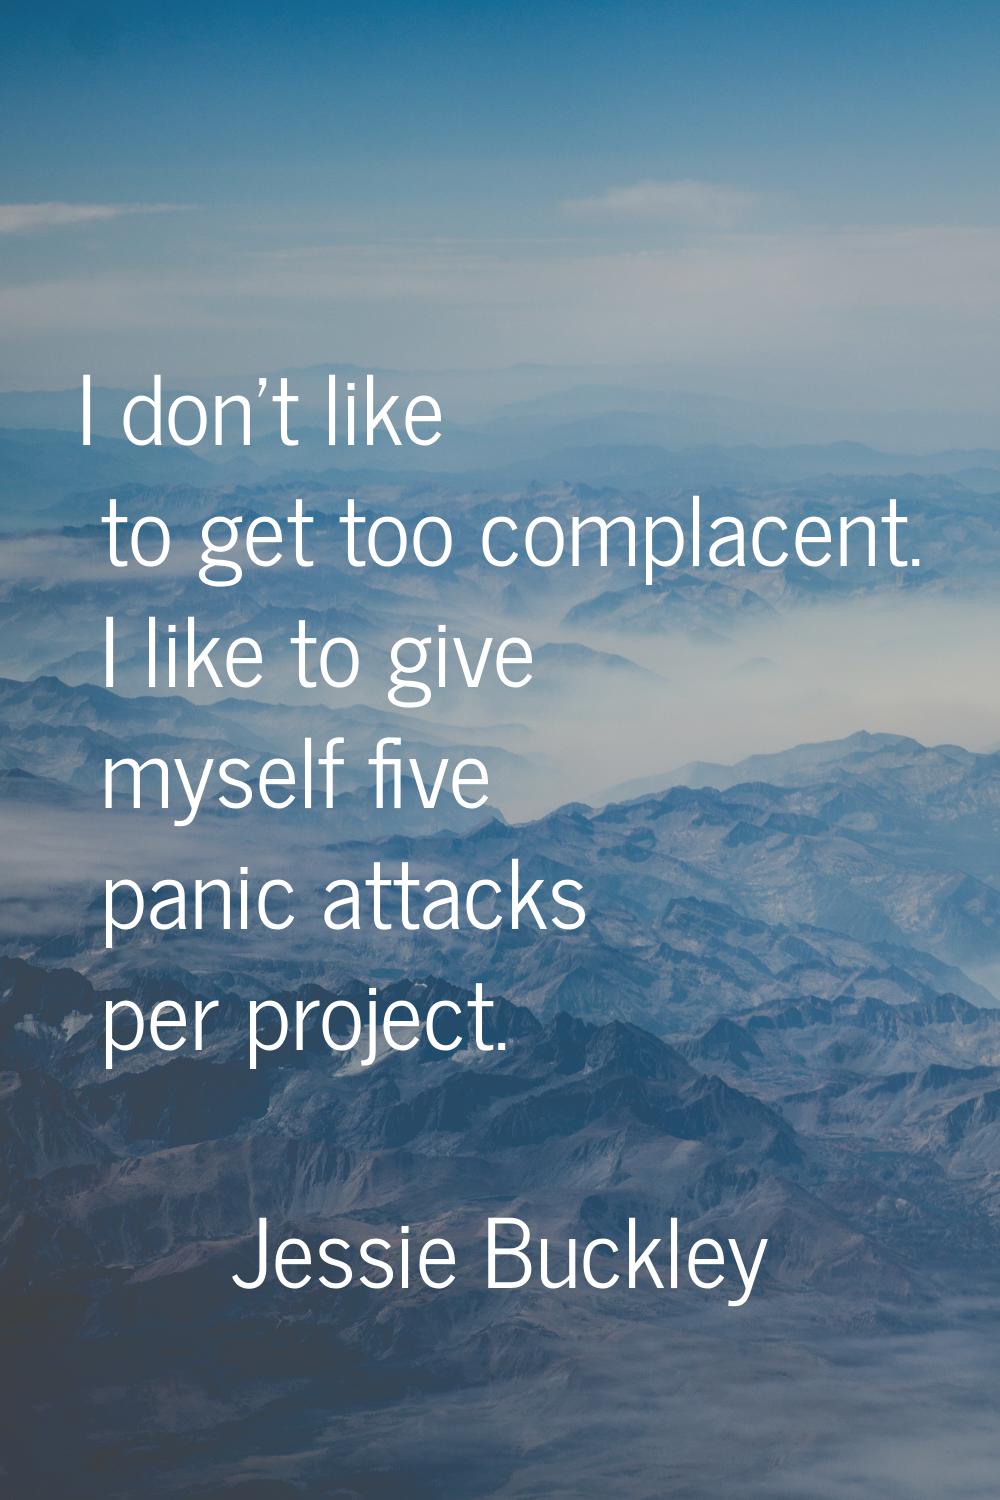 I don't like to get too complacent. I like to give myself five panic attacks per project.